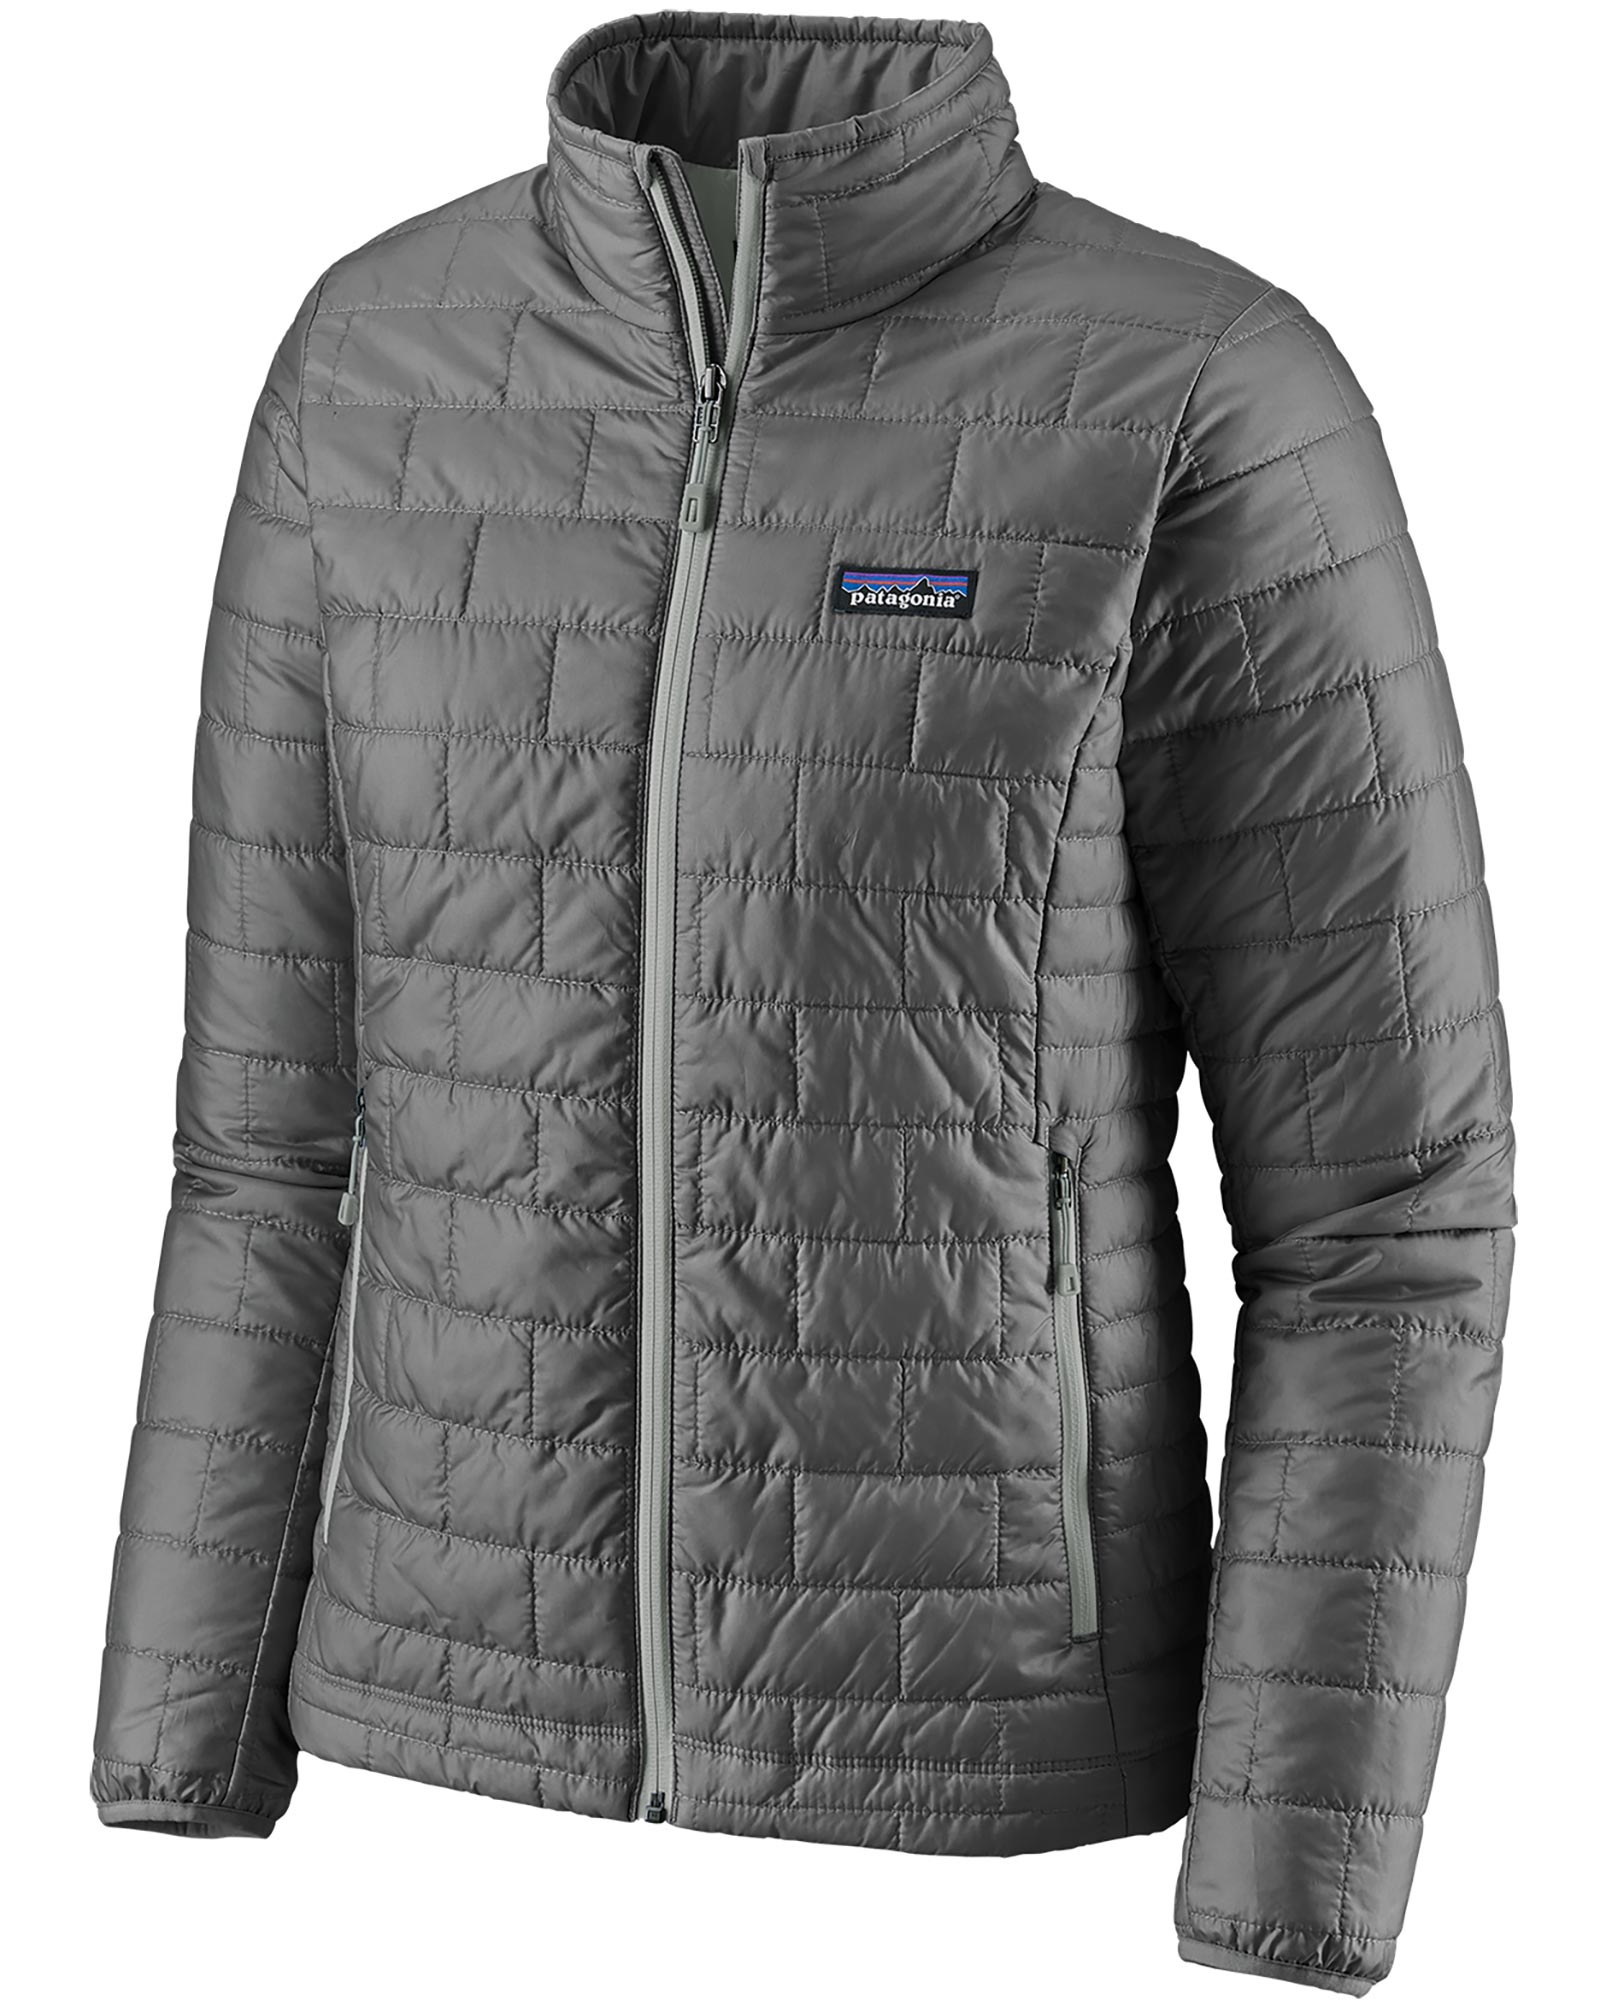 Patagonia Nano Puff Women’s Insulated Jacket - Feather Grey L